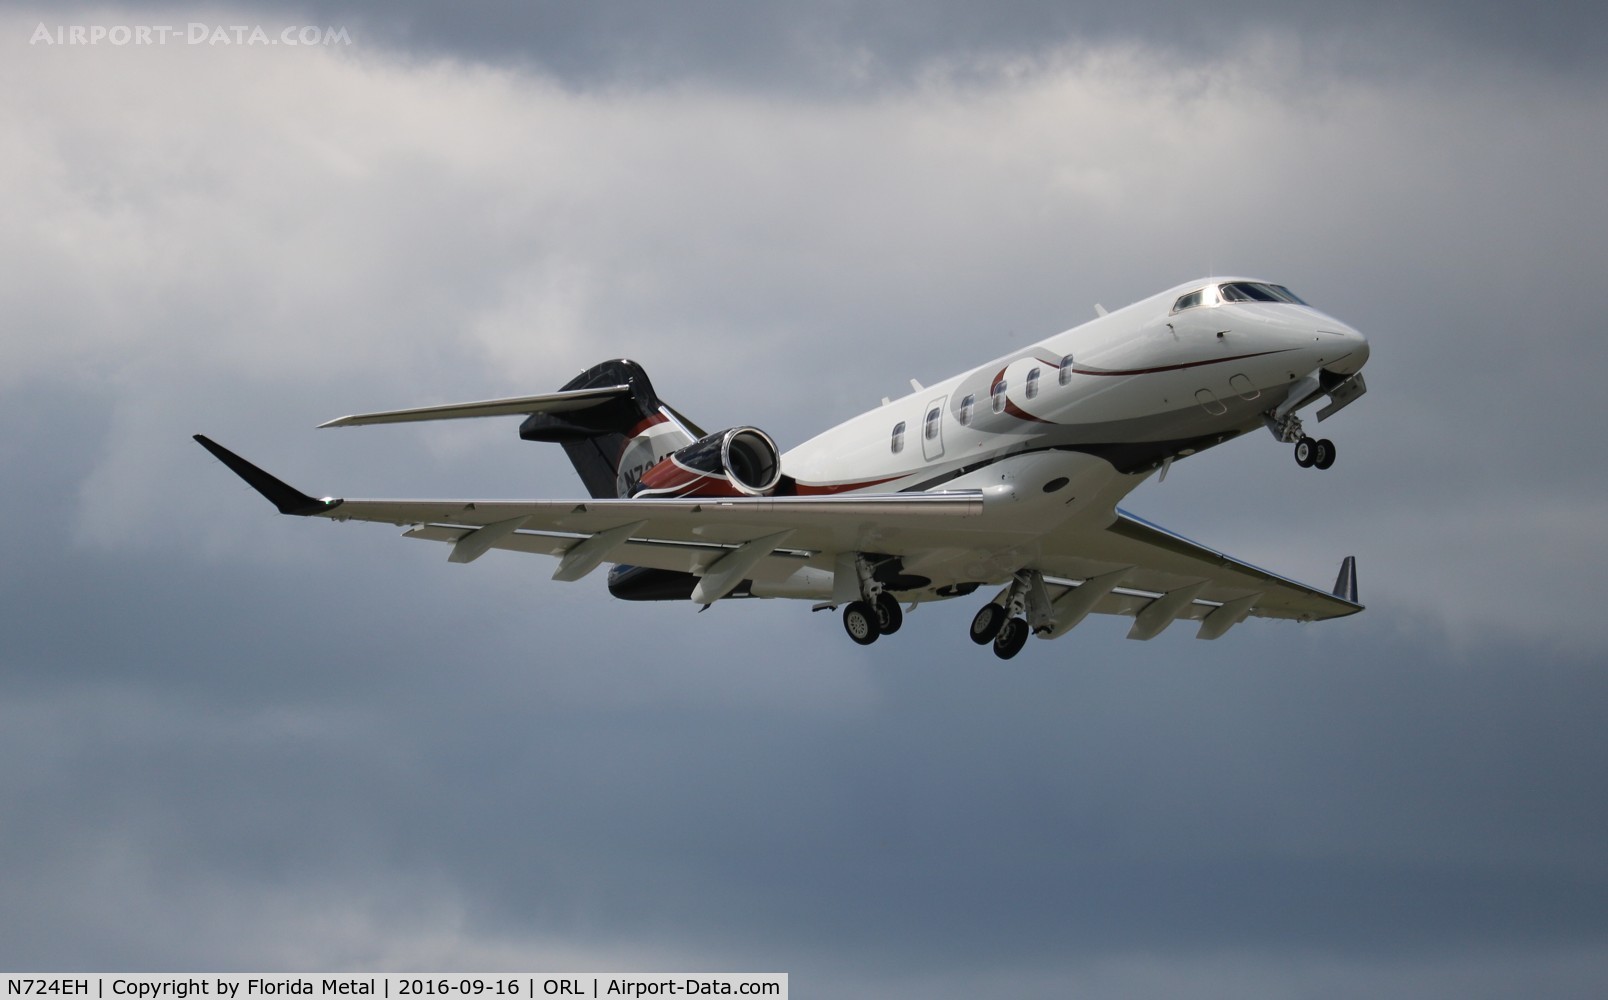 N724EH, 2016 Bombardier Challenger 350 (BD-100-1A10) C/N 20613, Challenger 350